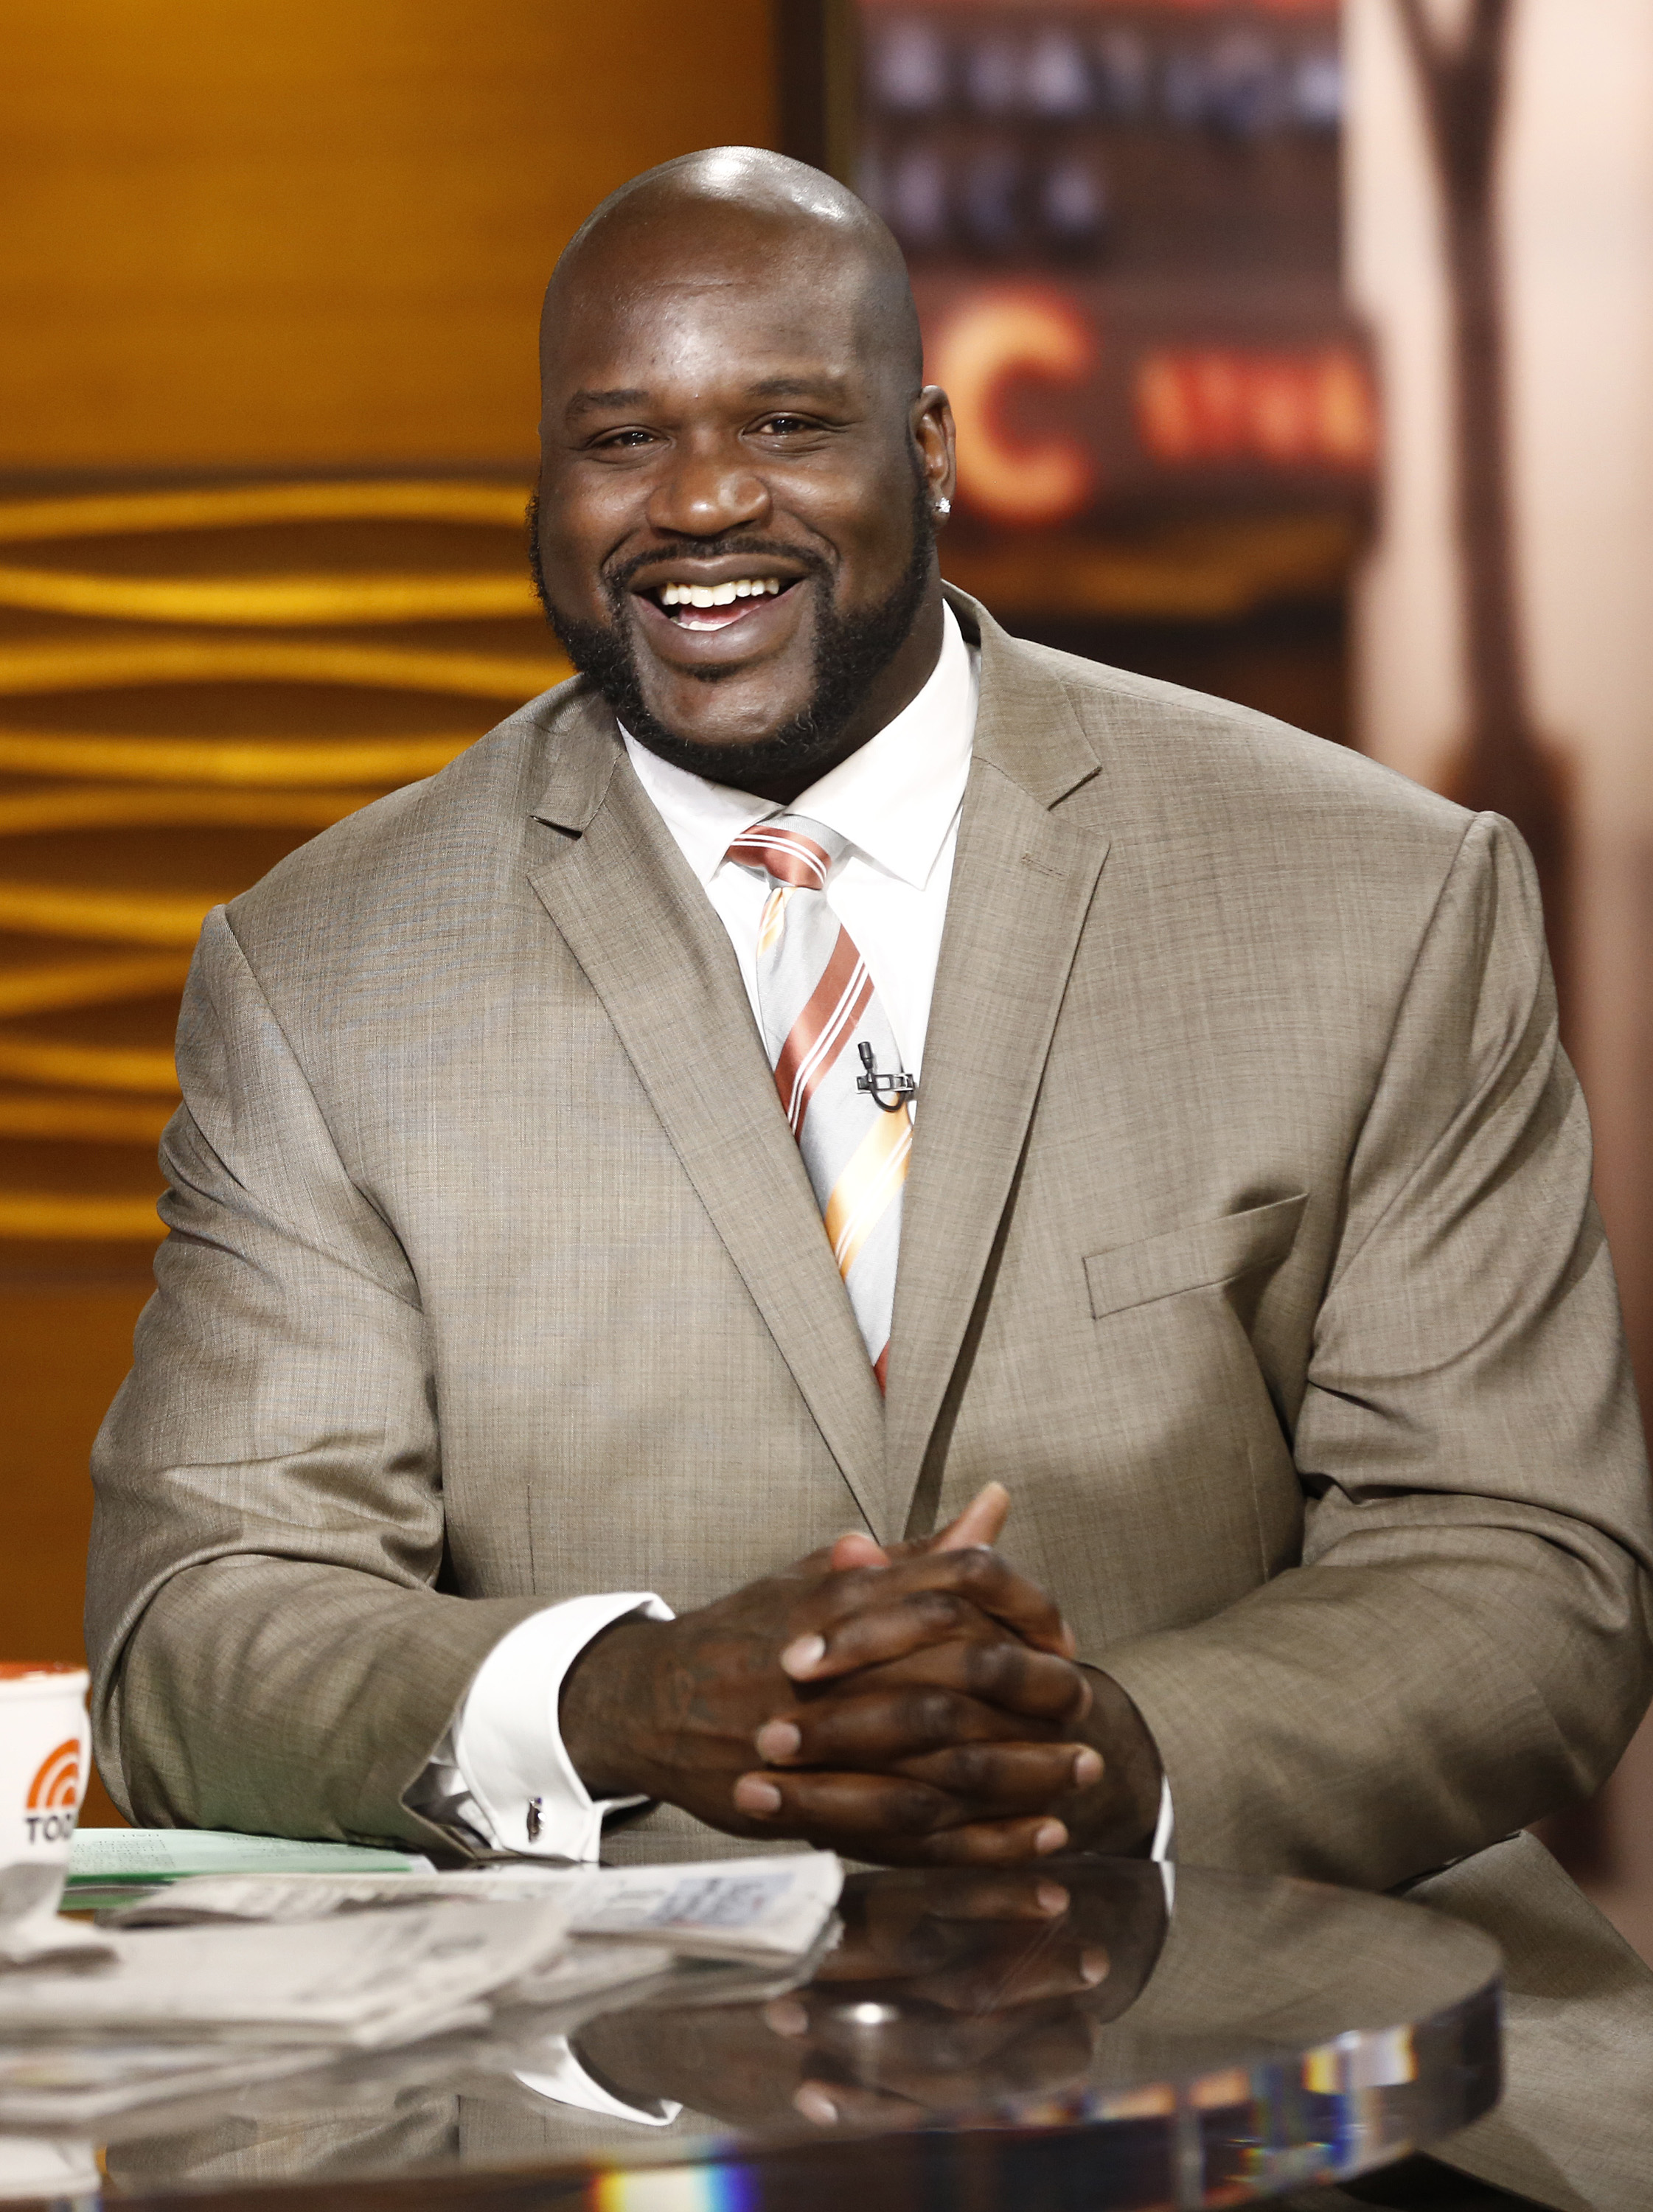 Shaquille O'Neal appears on NBC News' "Today" show, Feb. 26, 2014. (Peter Kramer—NBC/Getty Images)